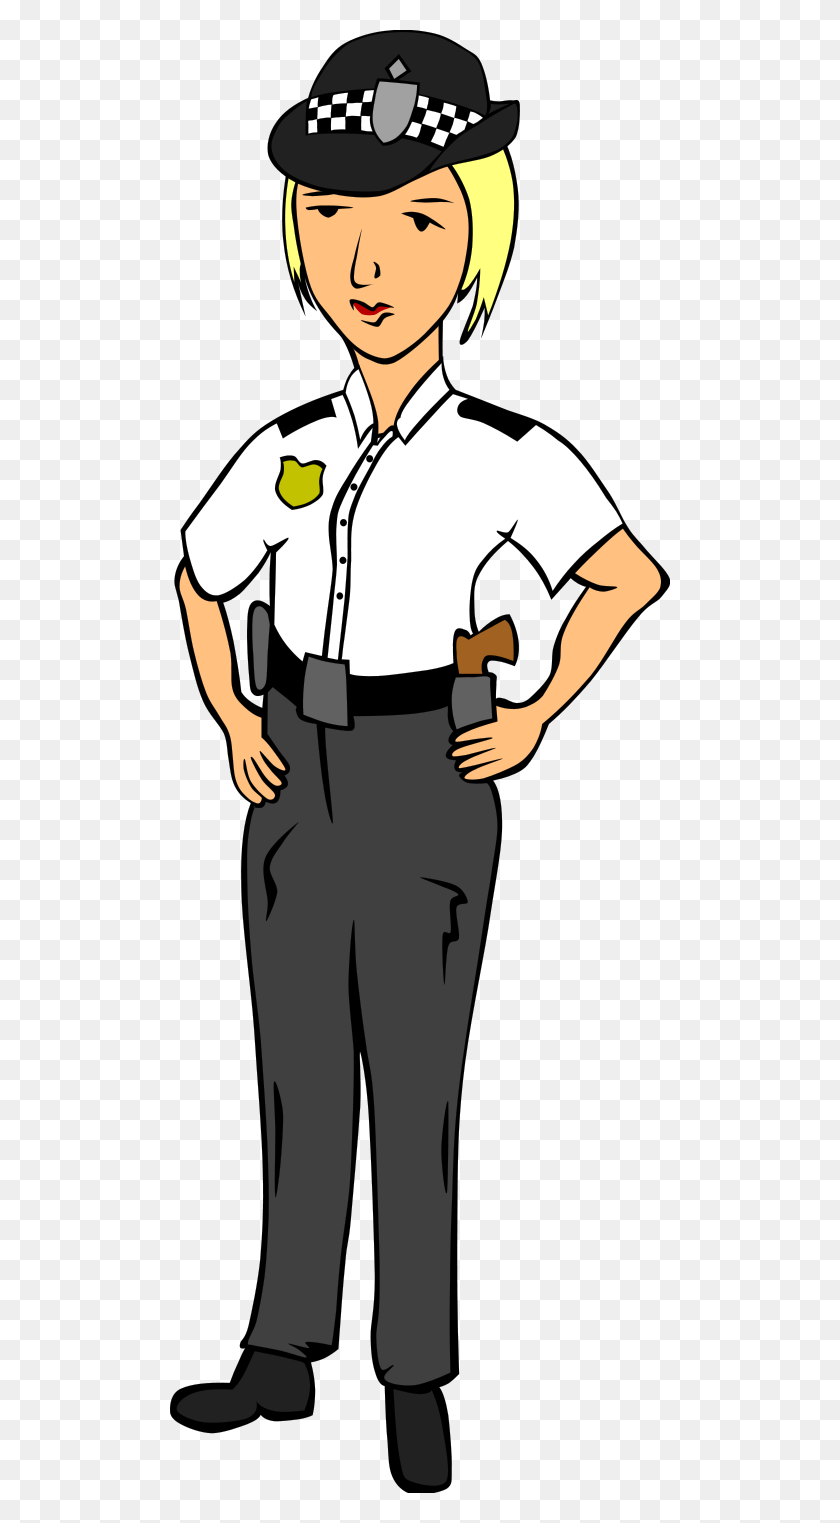 500x1463 Images For Clip Art Police Woman - Police Man Clipart